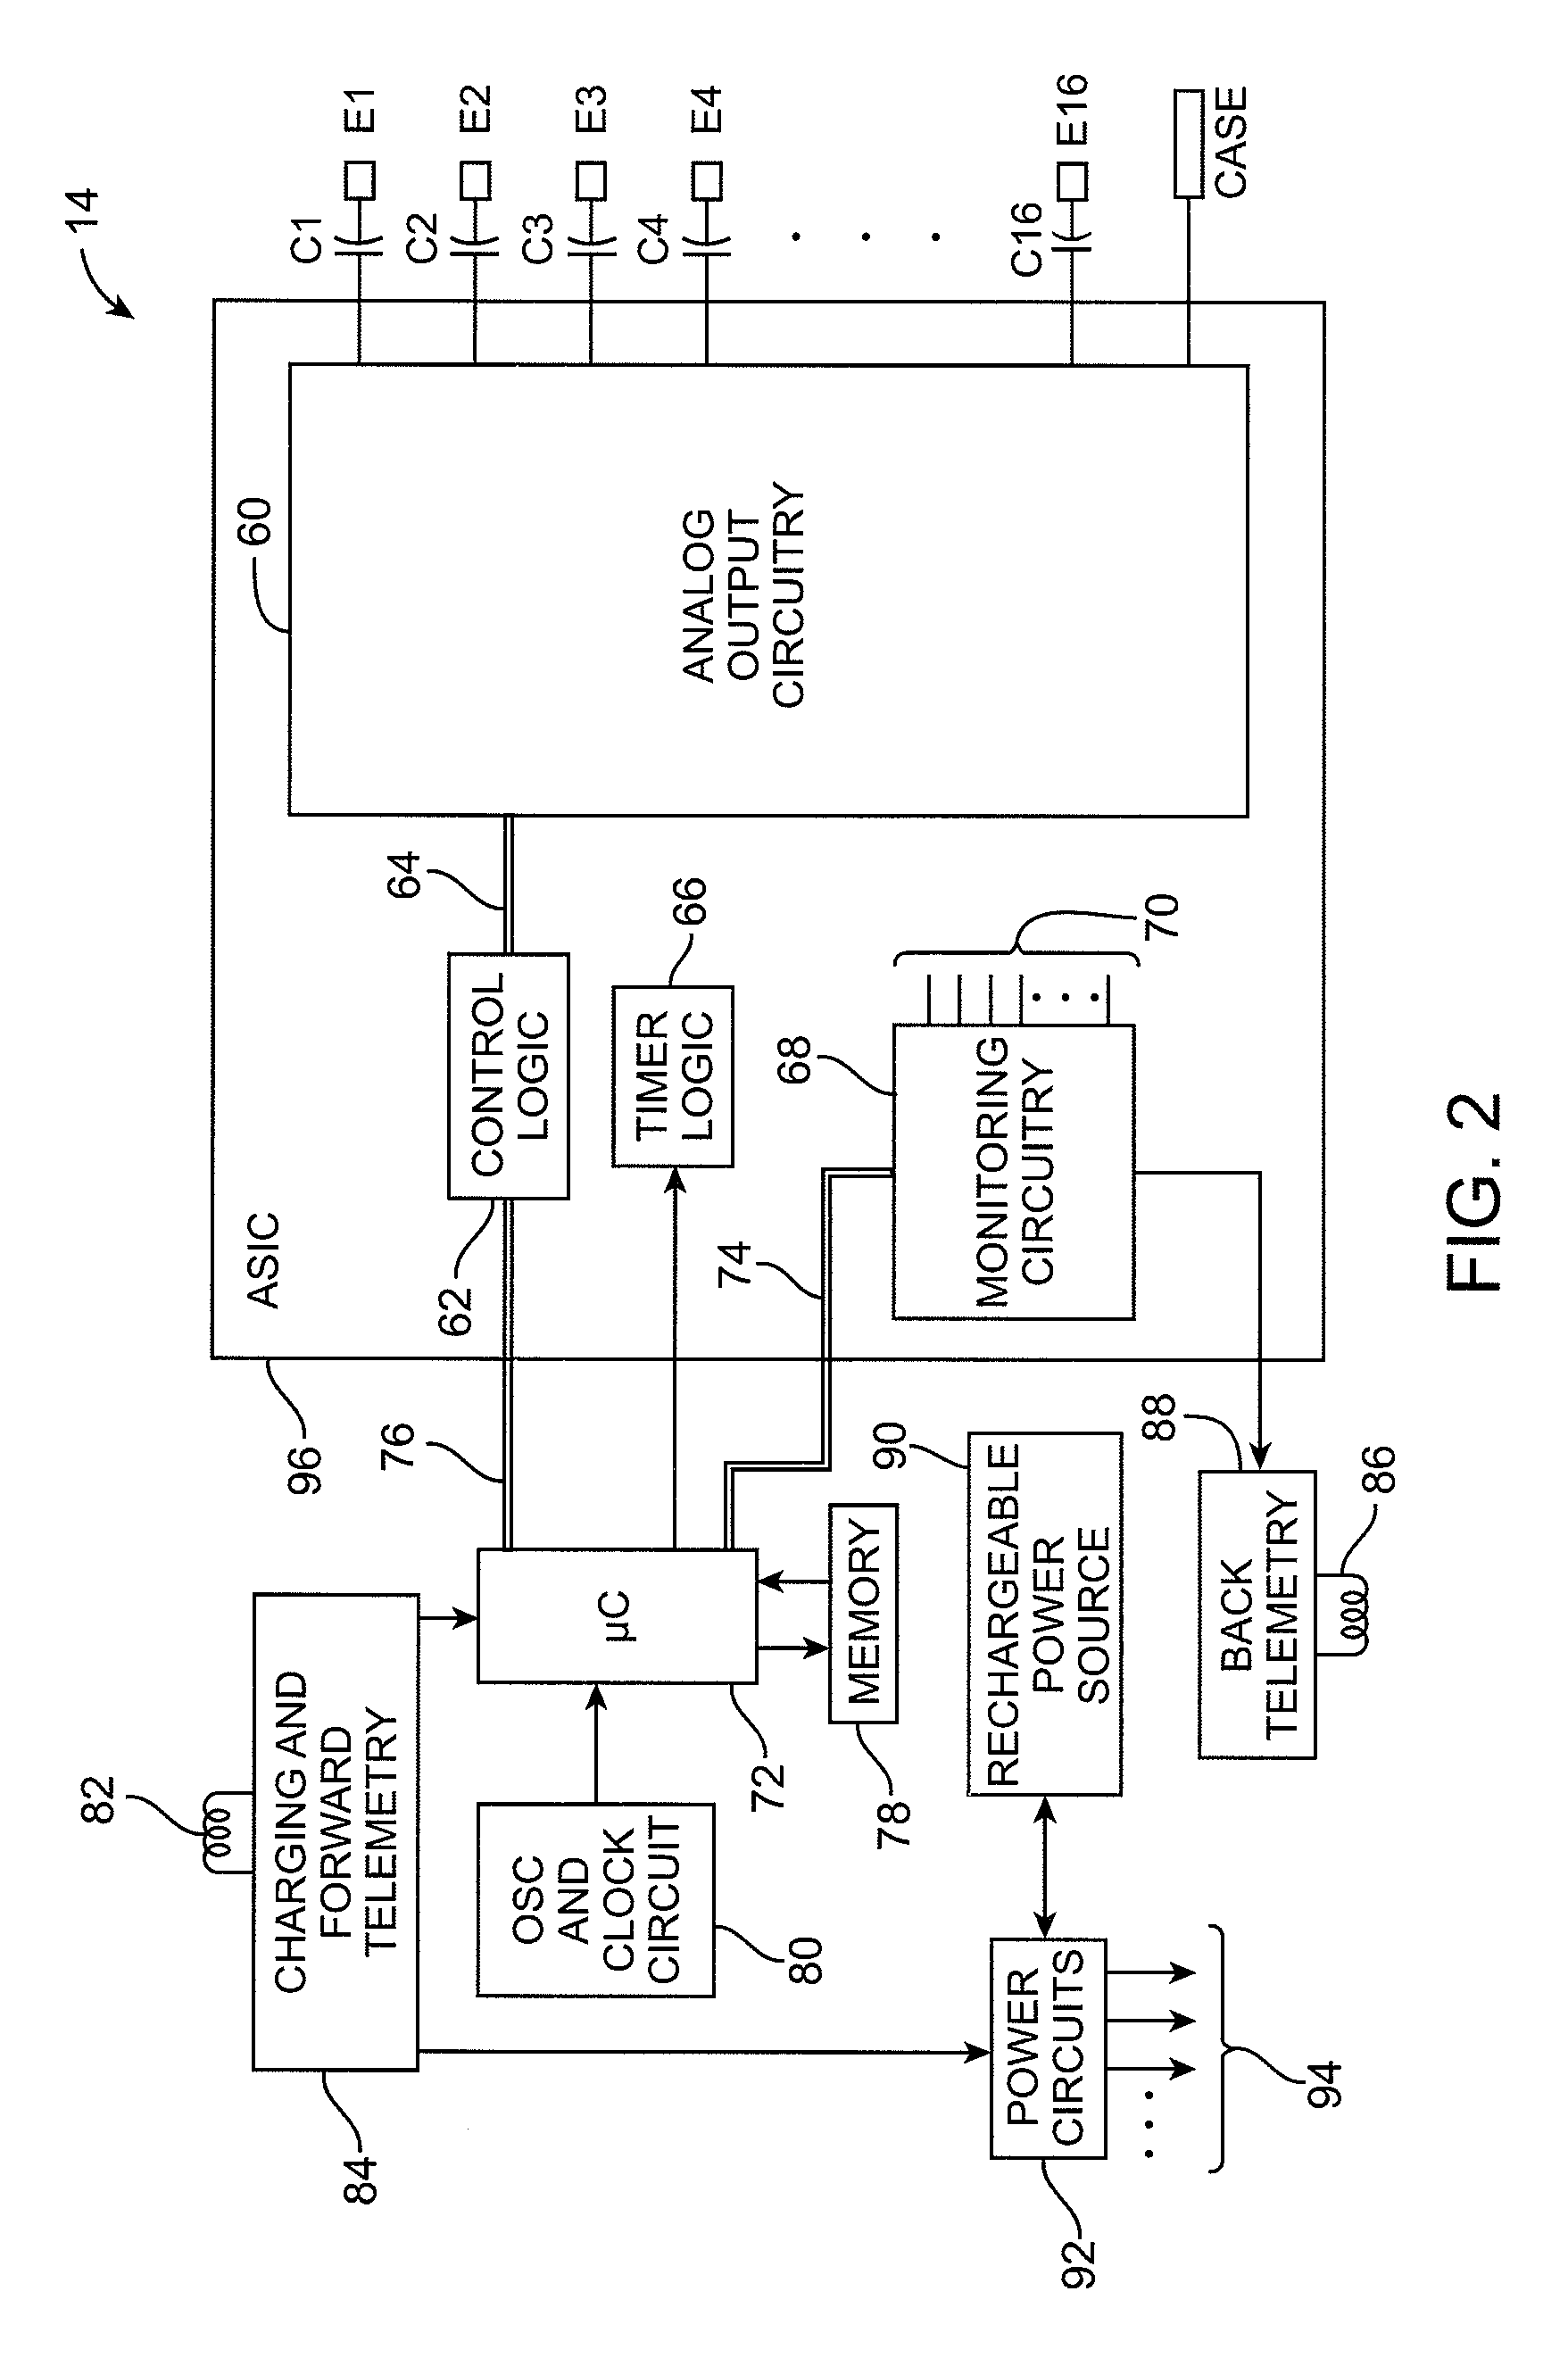 Automated fitting system for deep brain stimulation